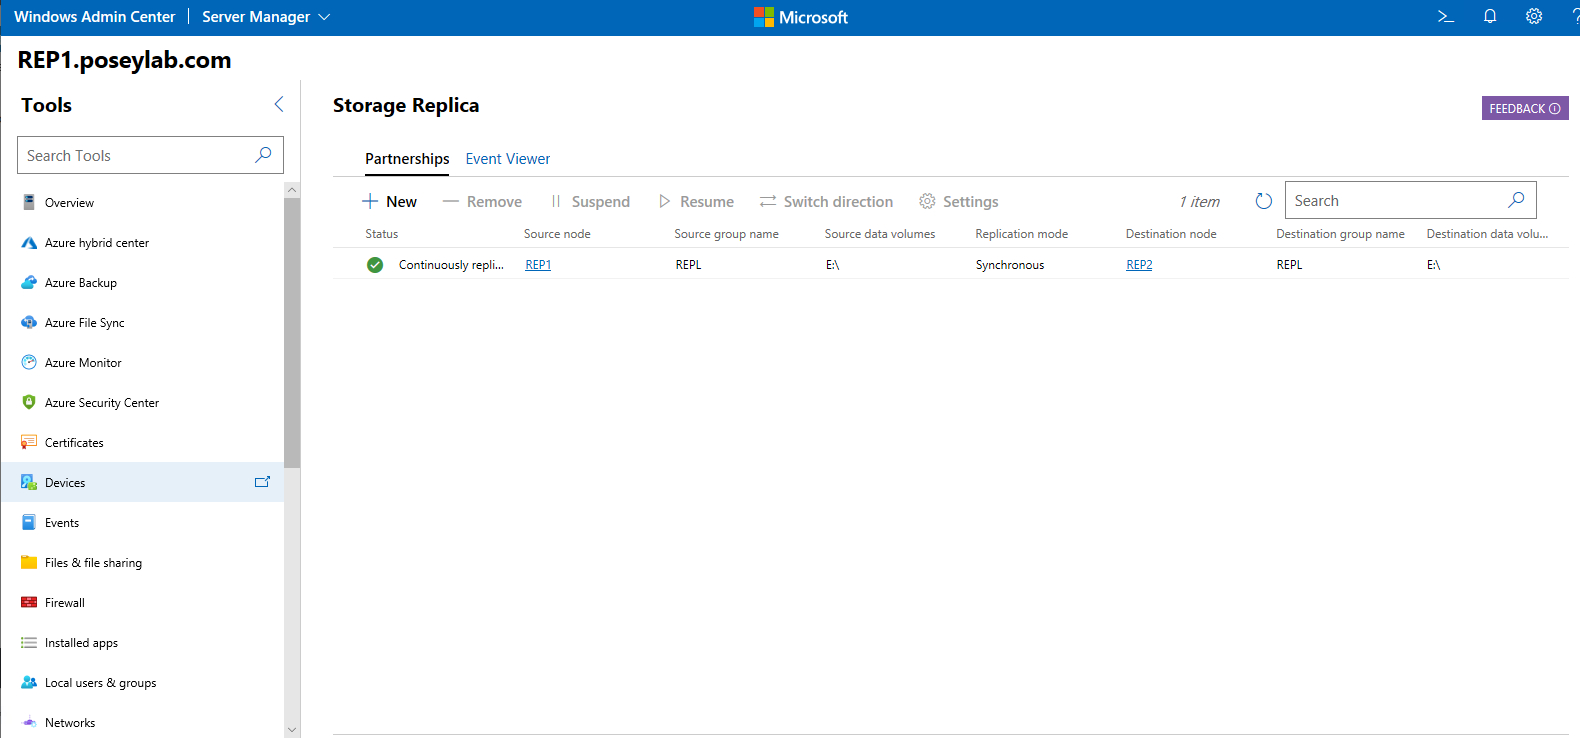 Screen shot of Storage Replica in Windows Admin Center, showing replication enabled